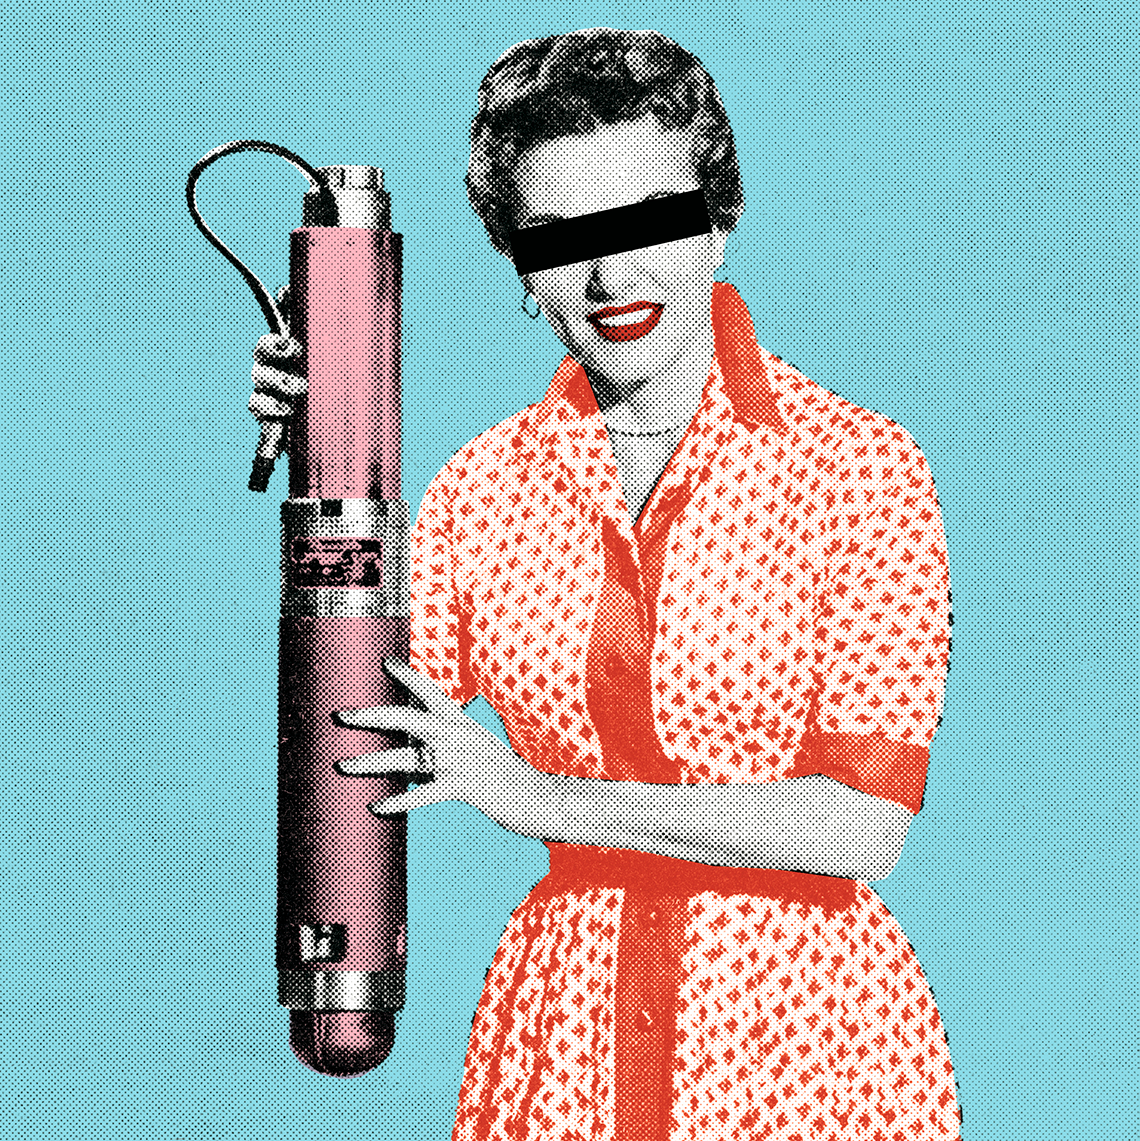 Prime Day 2022 Is Here, So Let's Talk About the Best Vibrator Deals on Amazon